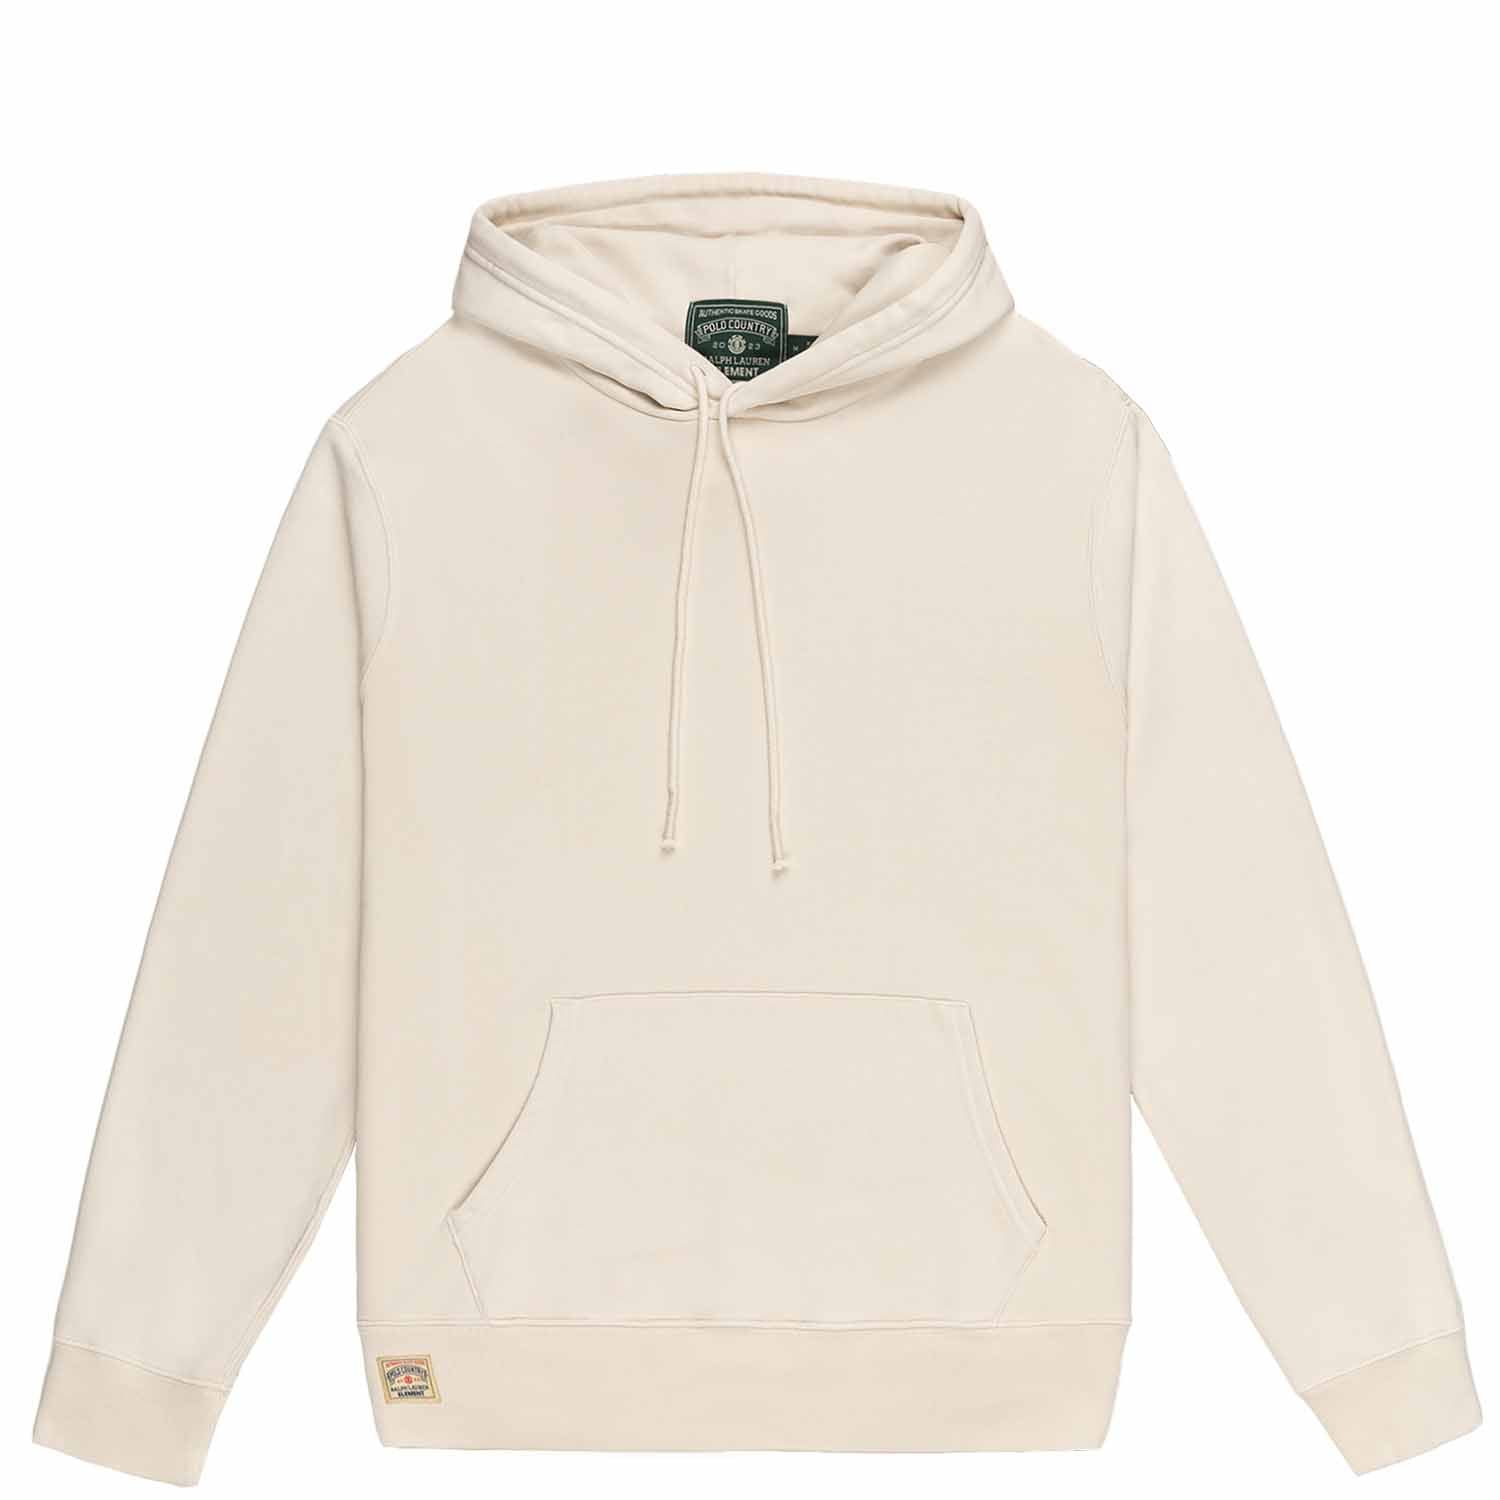 Polo Ralph Lauren x Element Skateboards Hoodie in cream white color. Small sewn on square logo at bottom left of hoodie on waist band.